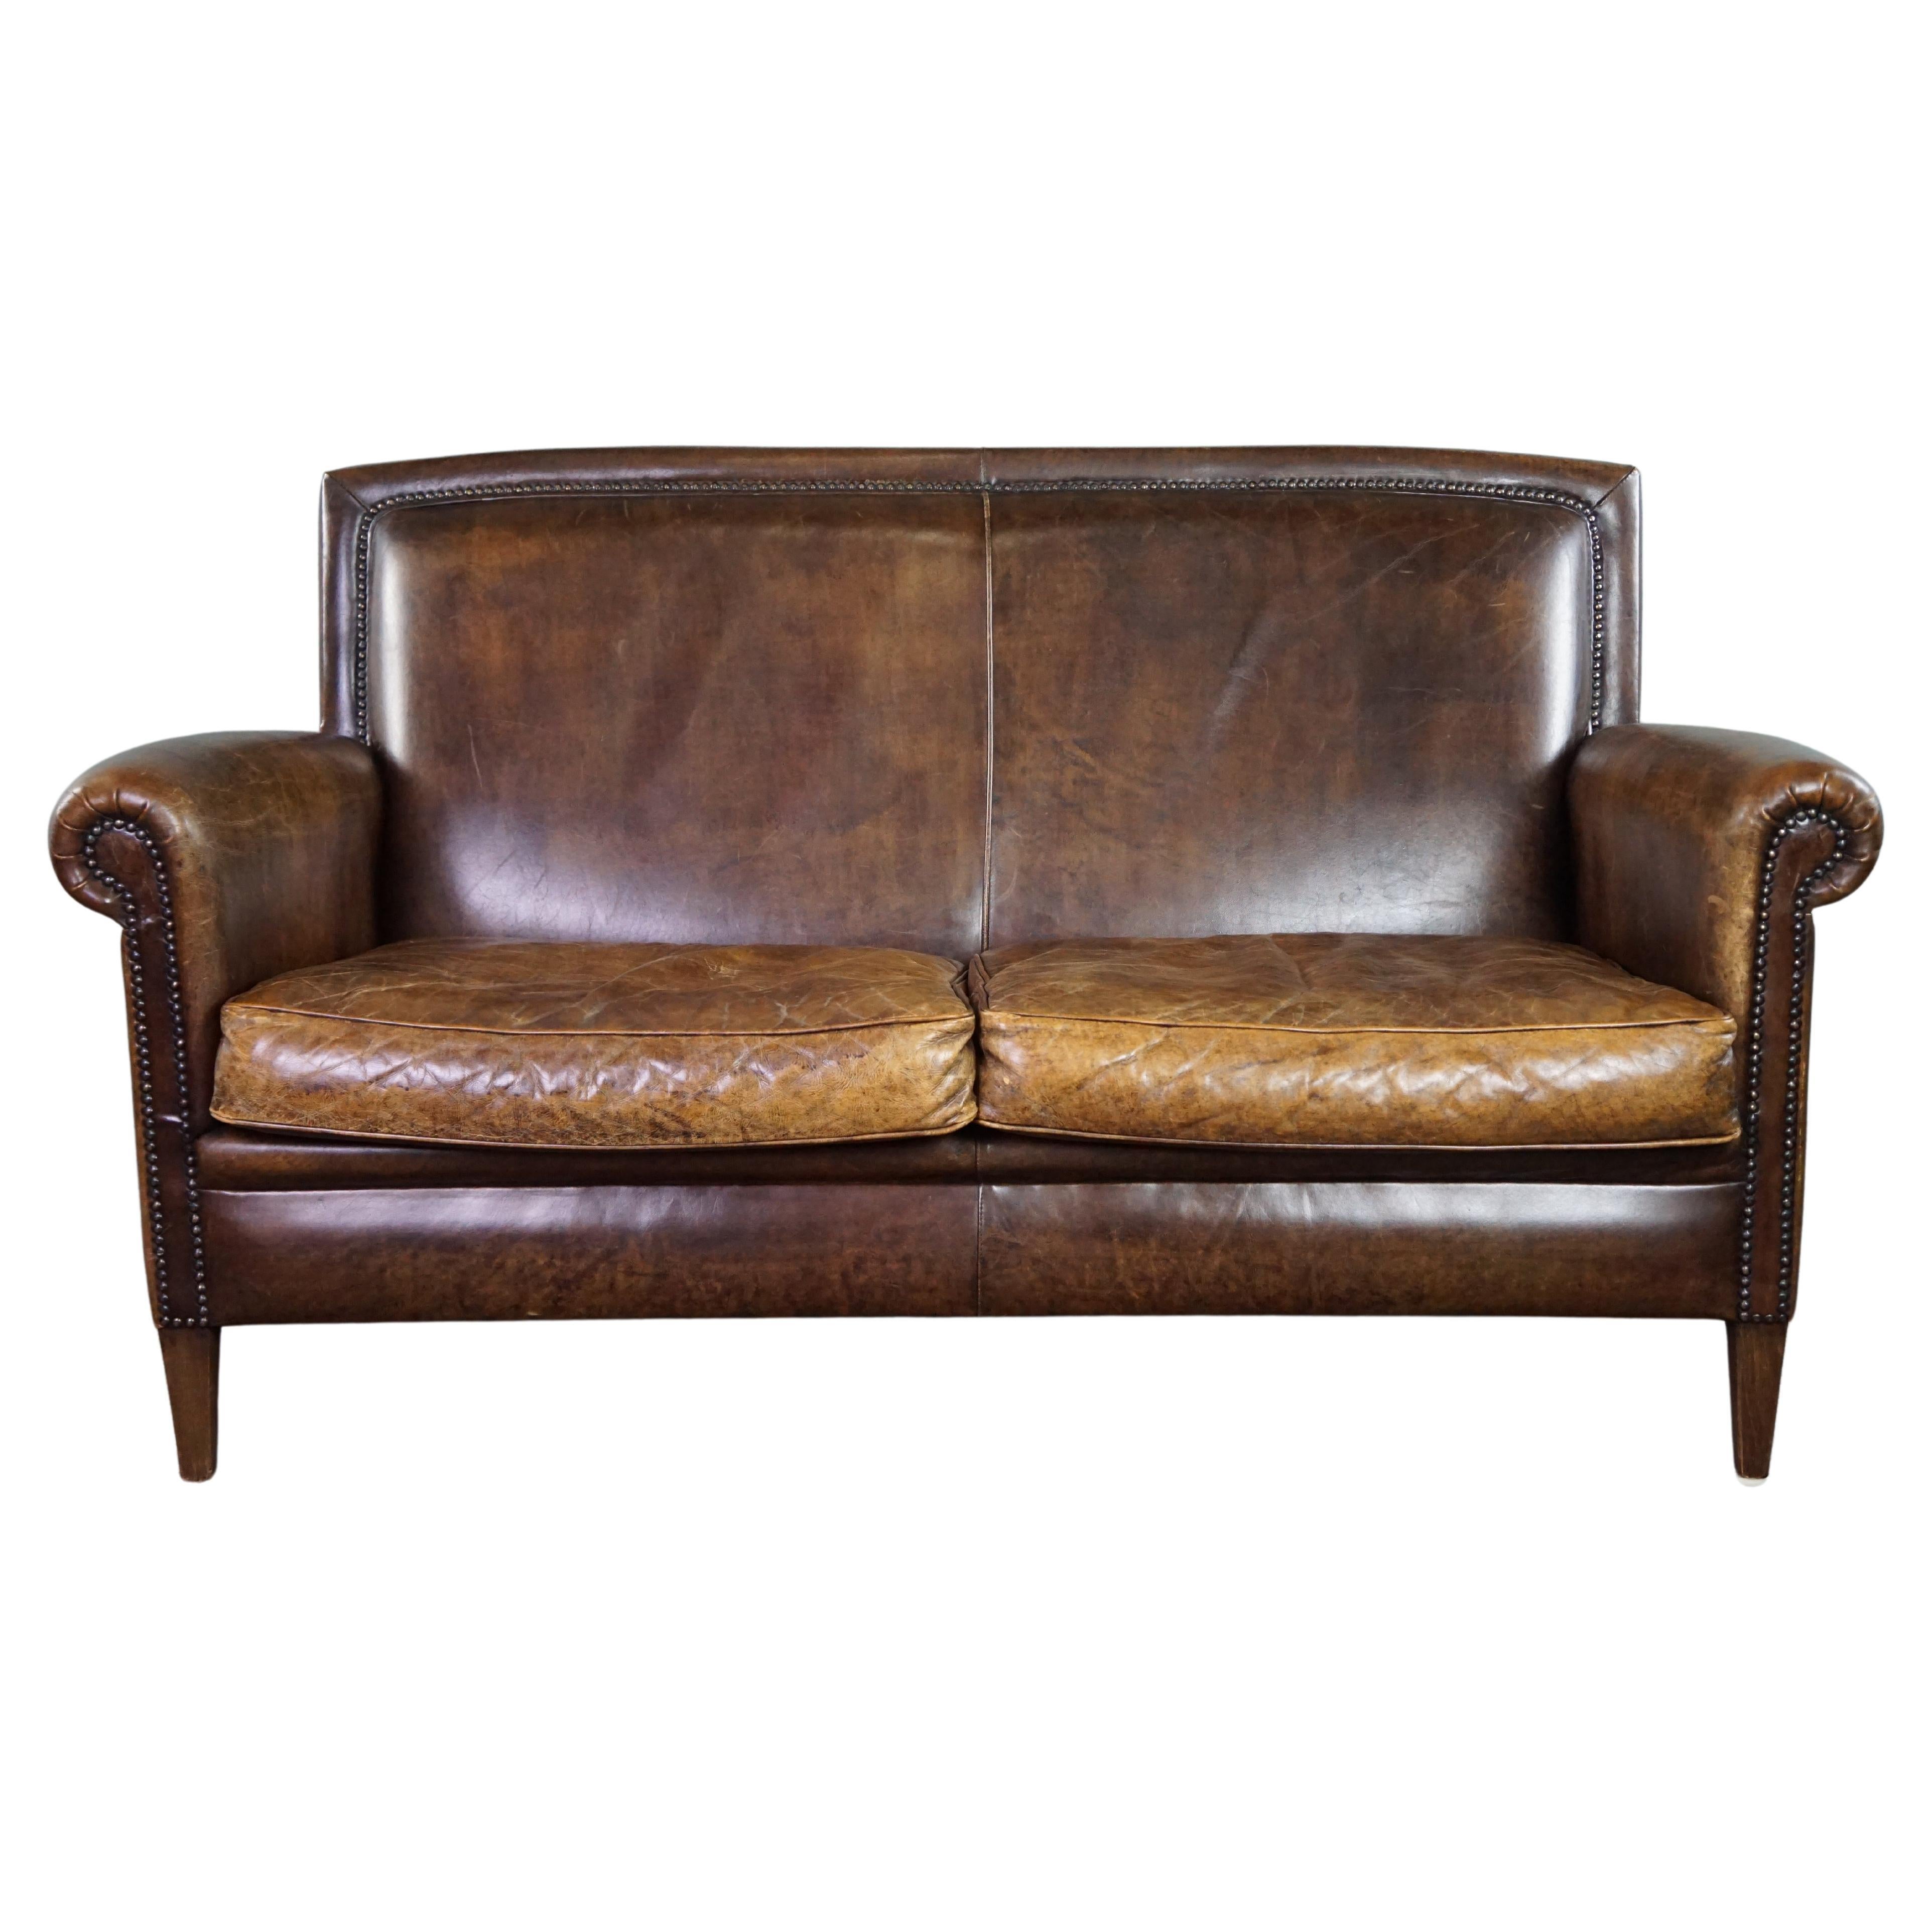 Beautiful dark cognac-colored cowhide 2-seater sofa in classic English style